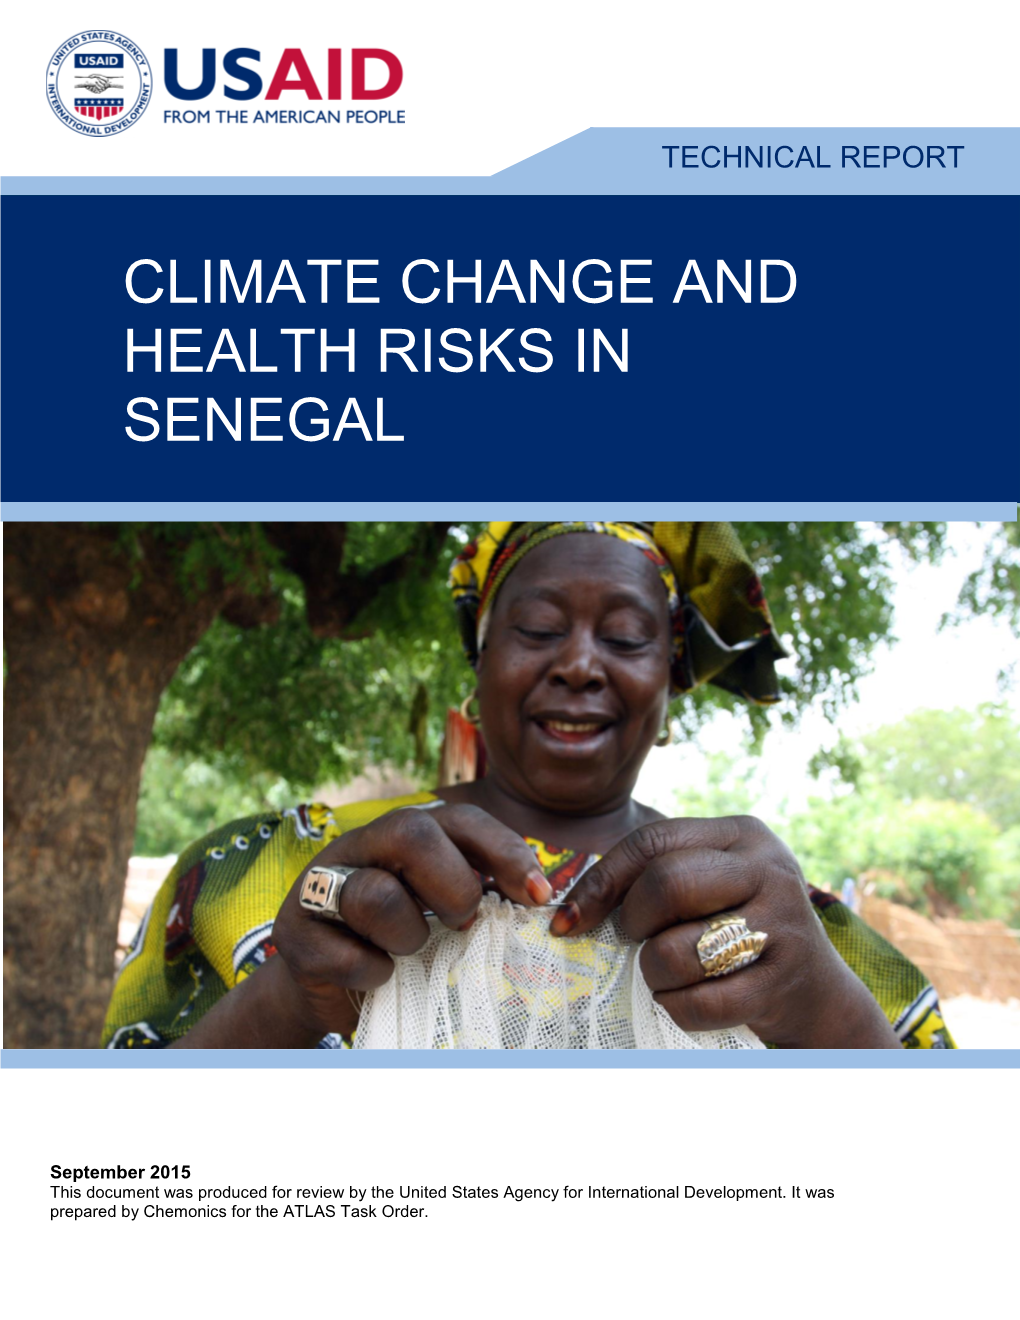 Climate Change and Health Risks in Senegal